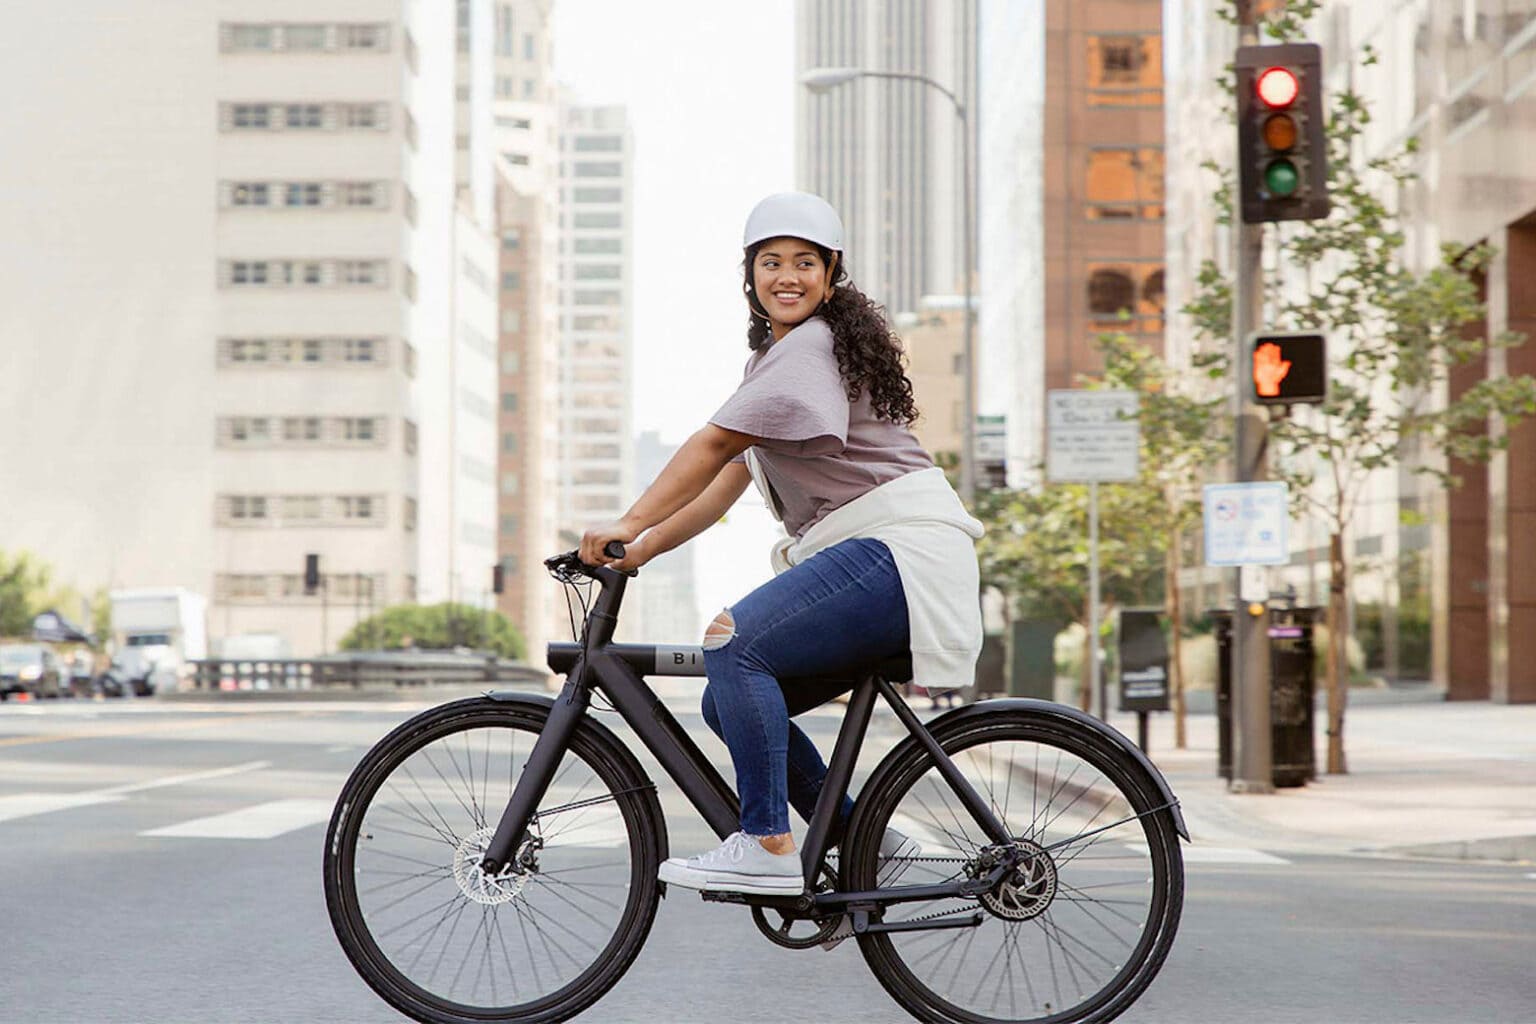 Take over $1000 off this fast, reliable eBike.